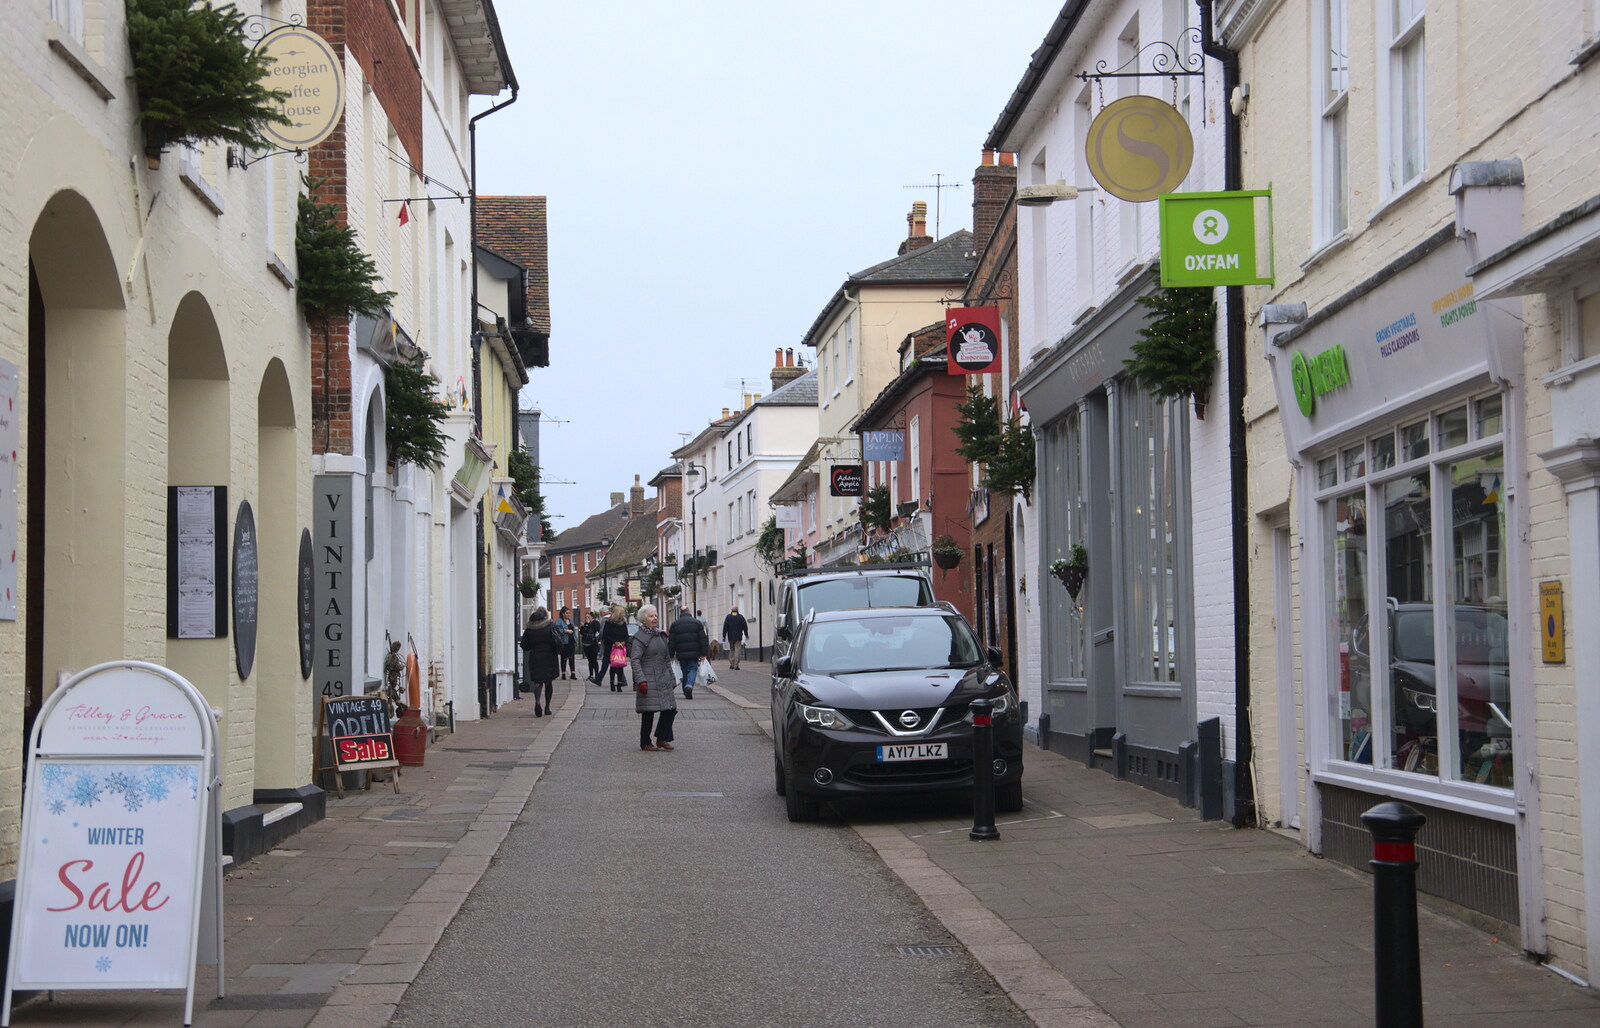 More street life on the Thoroughfare from A Postcard From Woodbridge, Suffolk - 4th January 2019